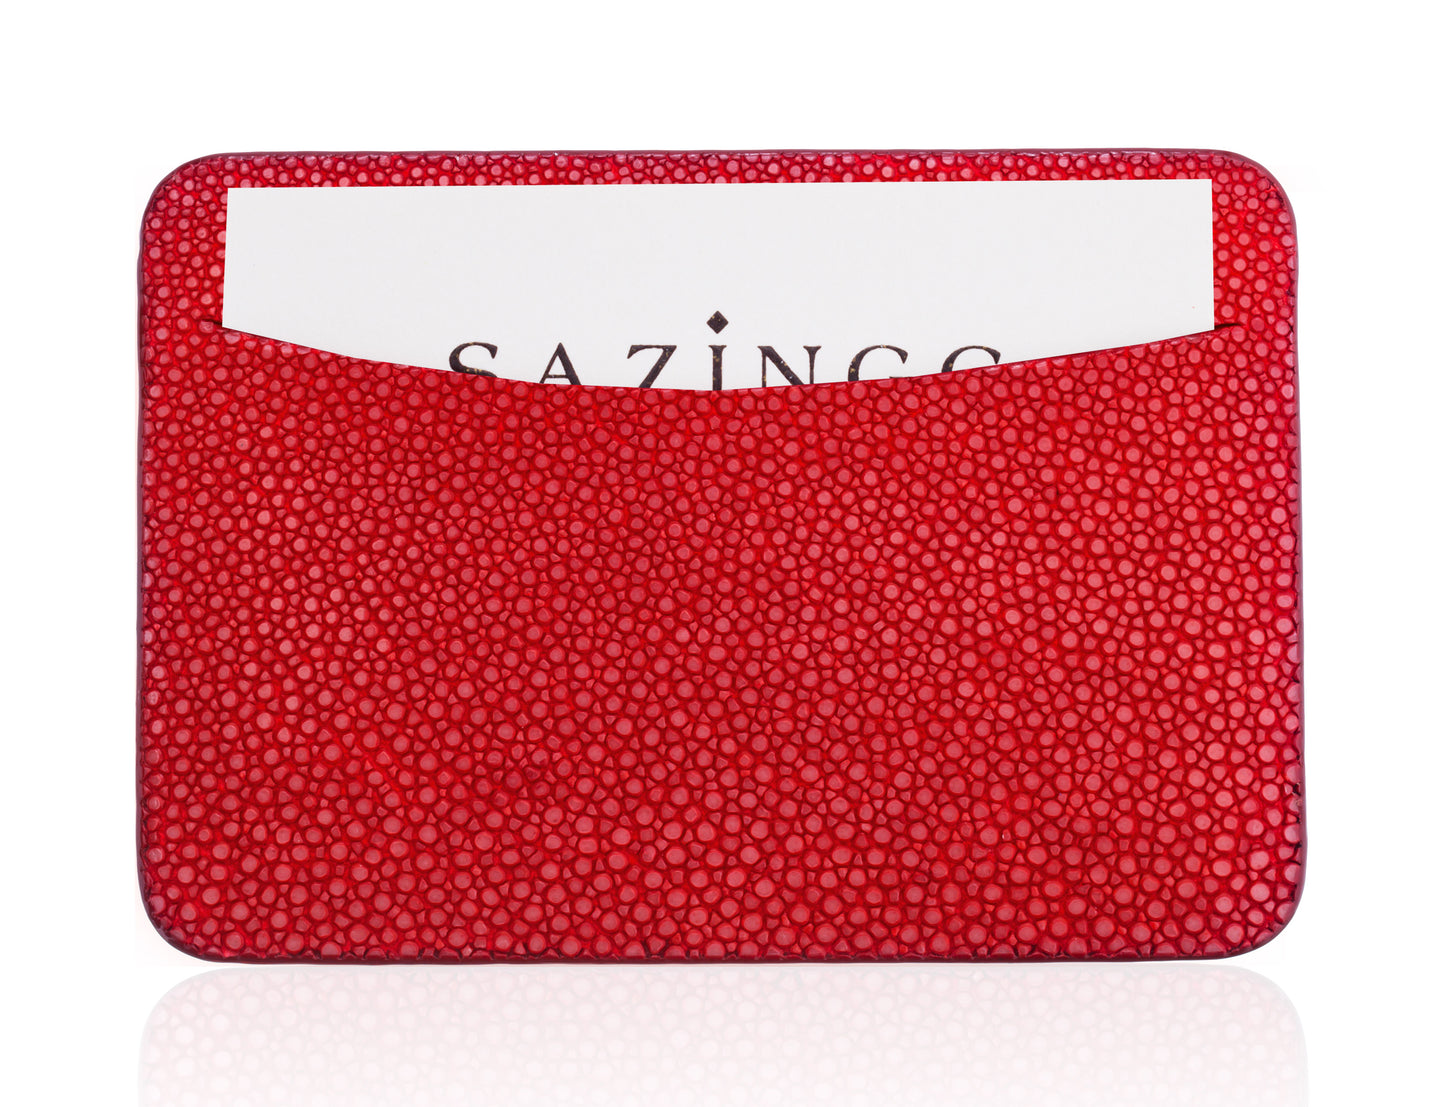 Bright Red Stingray Leather Credit Card Holder